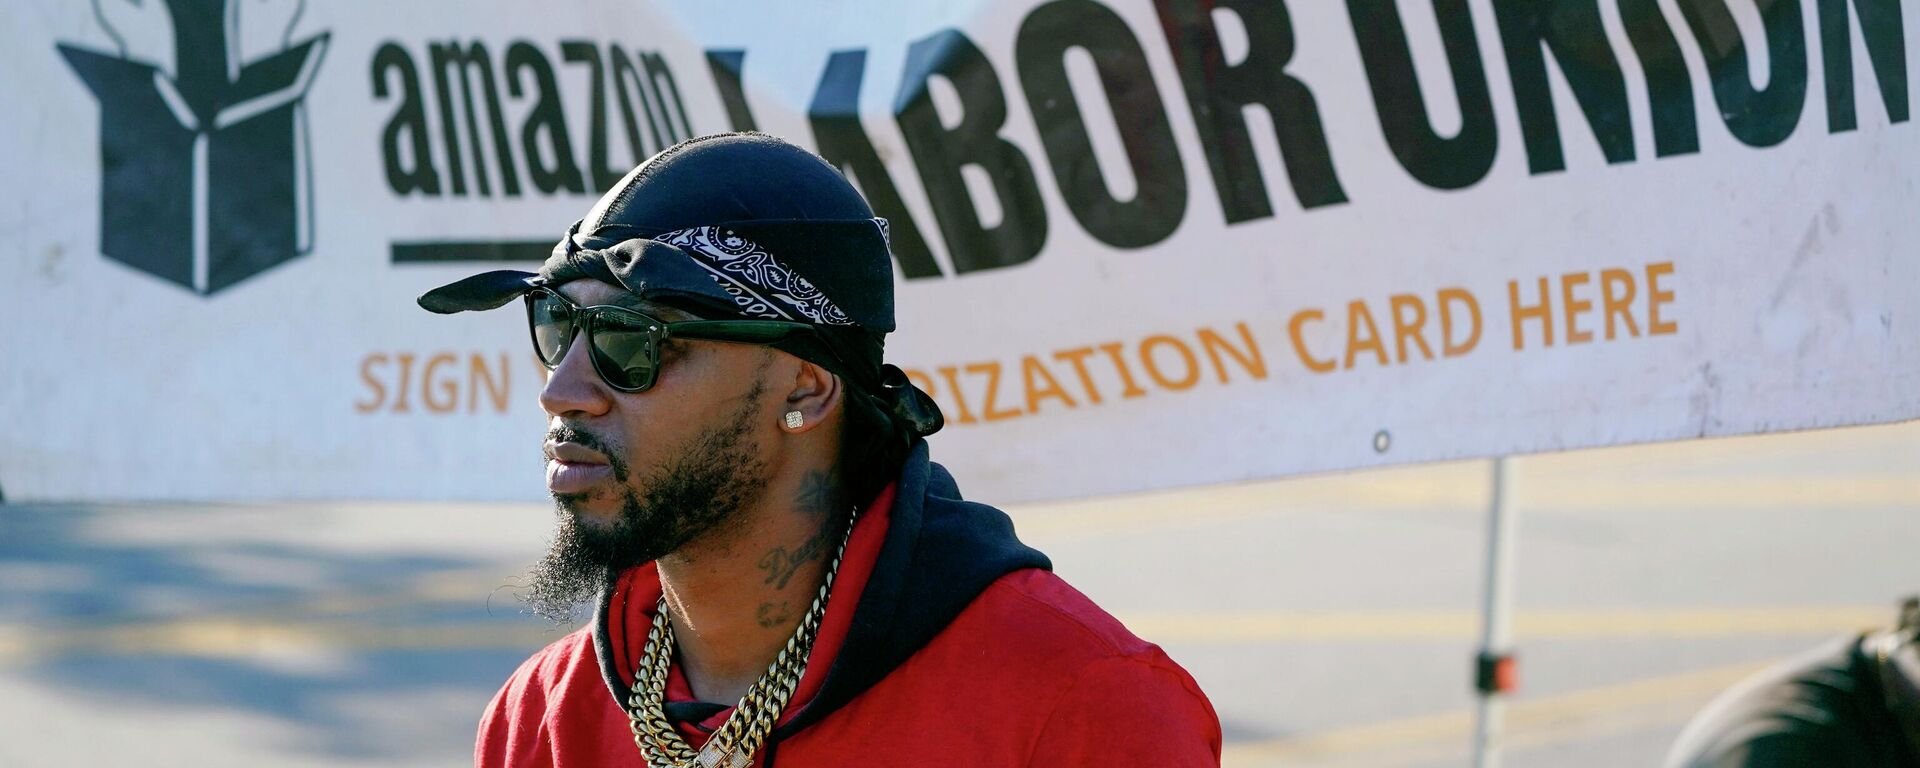 Christian Smalls, president of the Amazon Labor Union (ALU), stands by an information booth collecting signatures across the street from an Amazon distribution center in the Staten Island borough of New York, Thursday, Oct. 21, 2021. - Sputnik International, 1920, 12.04.2022